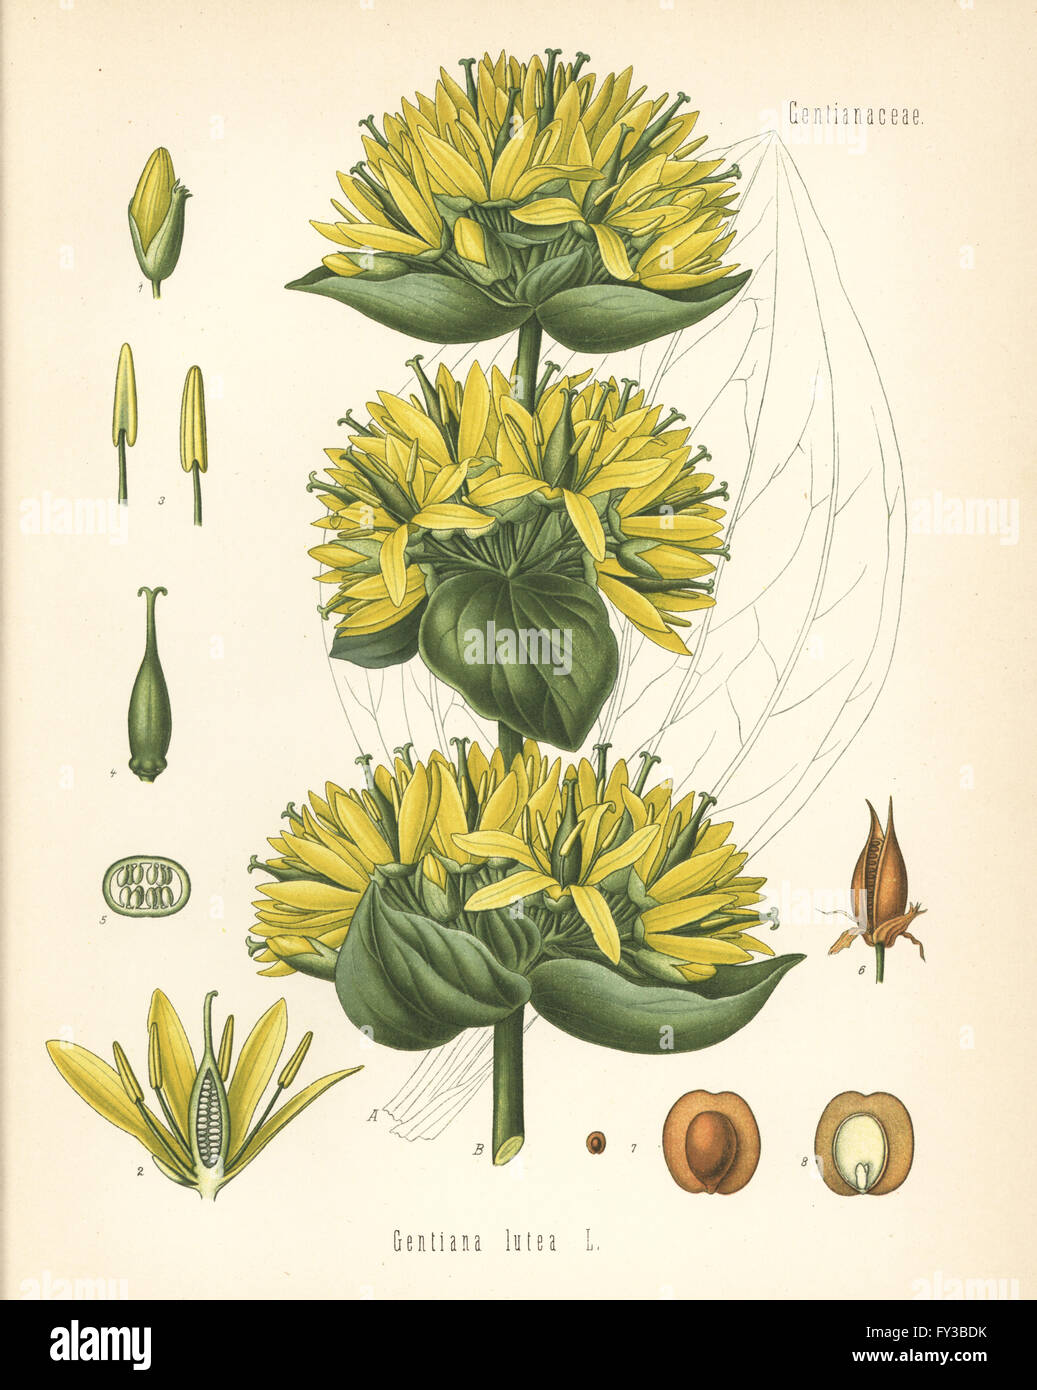 Gentian, Gentiana lutea. Chromolithograph after a botanical illustration from Hermann Adolph Koehler's Medicinal Plants, edited by Gustav Pabst, Koehler, Germany, 1887. Stock Photo